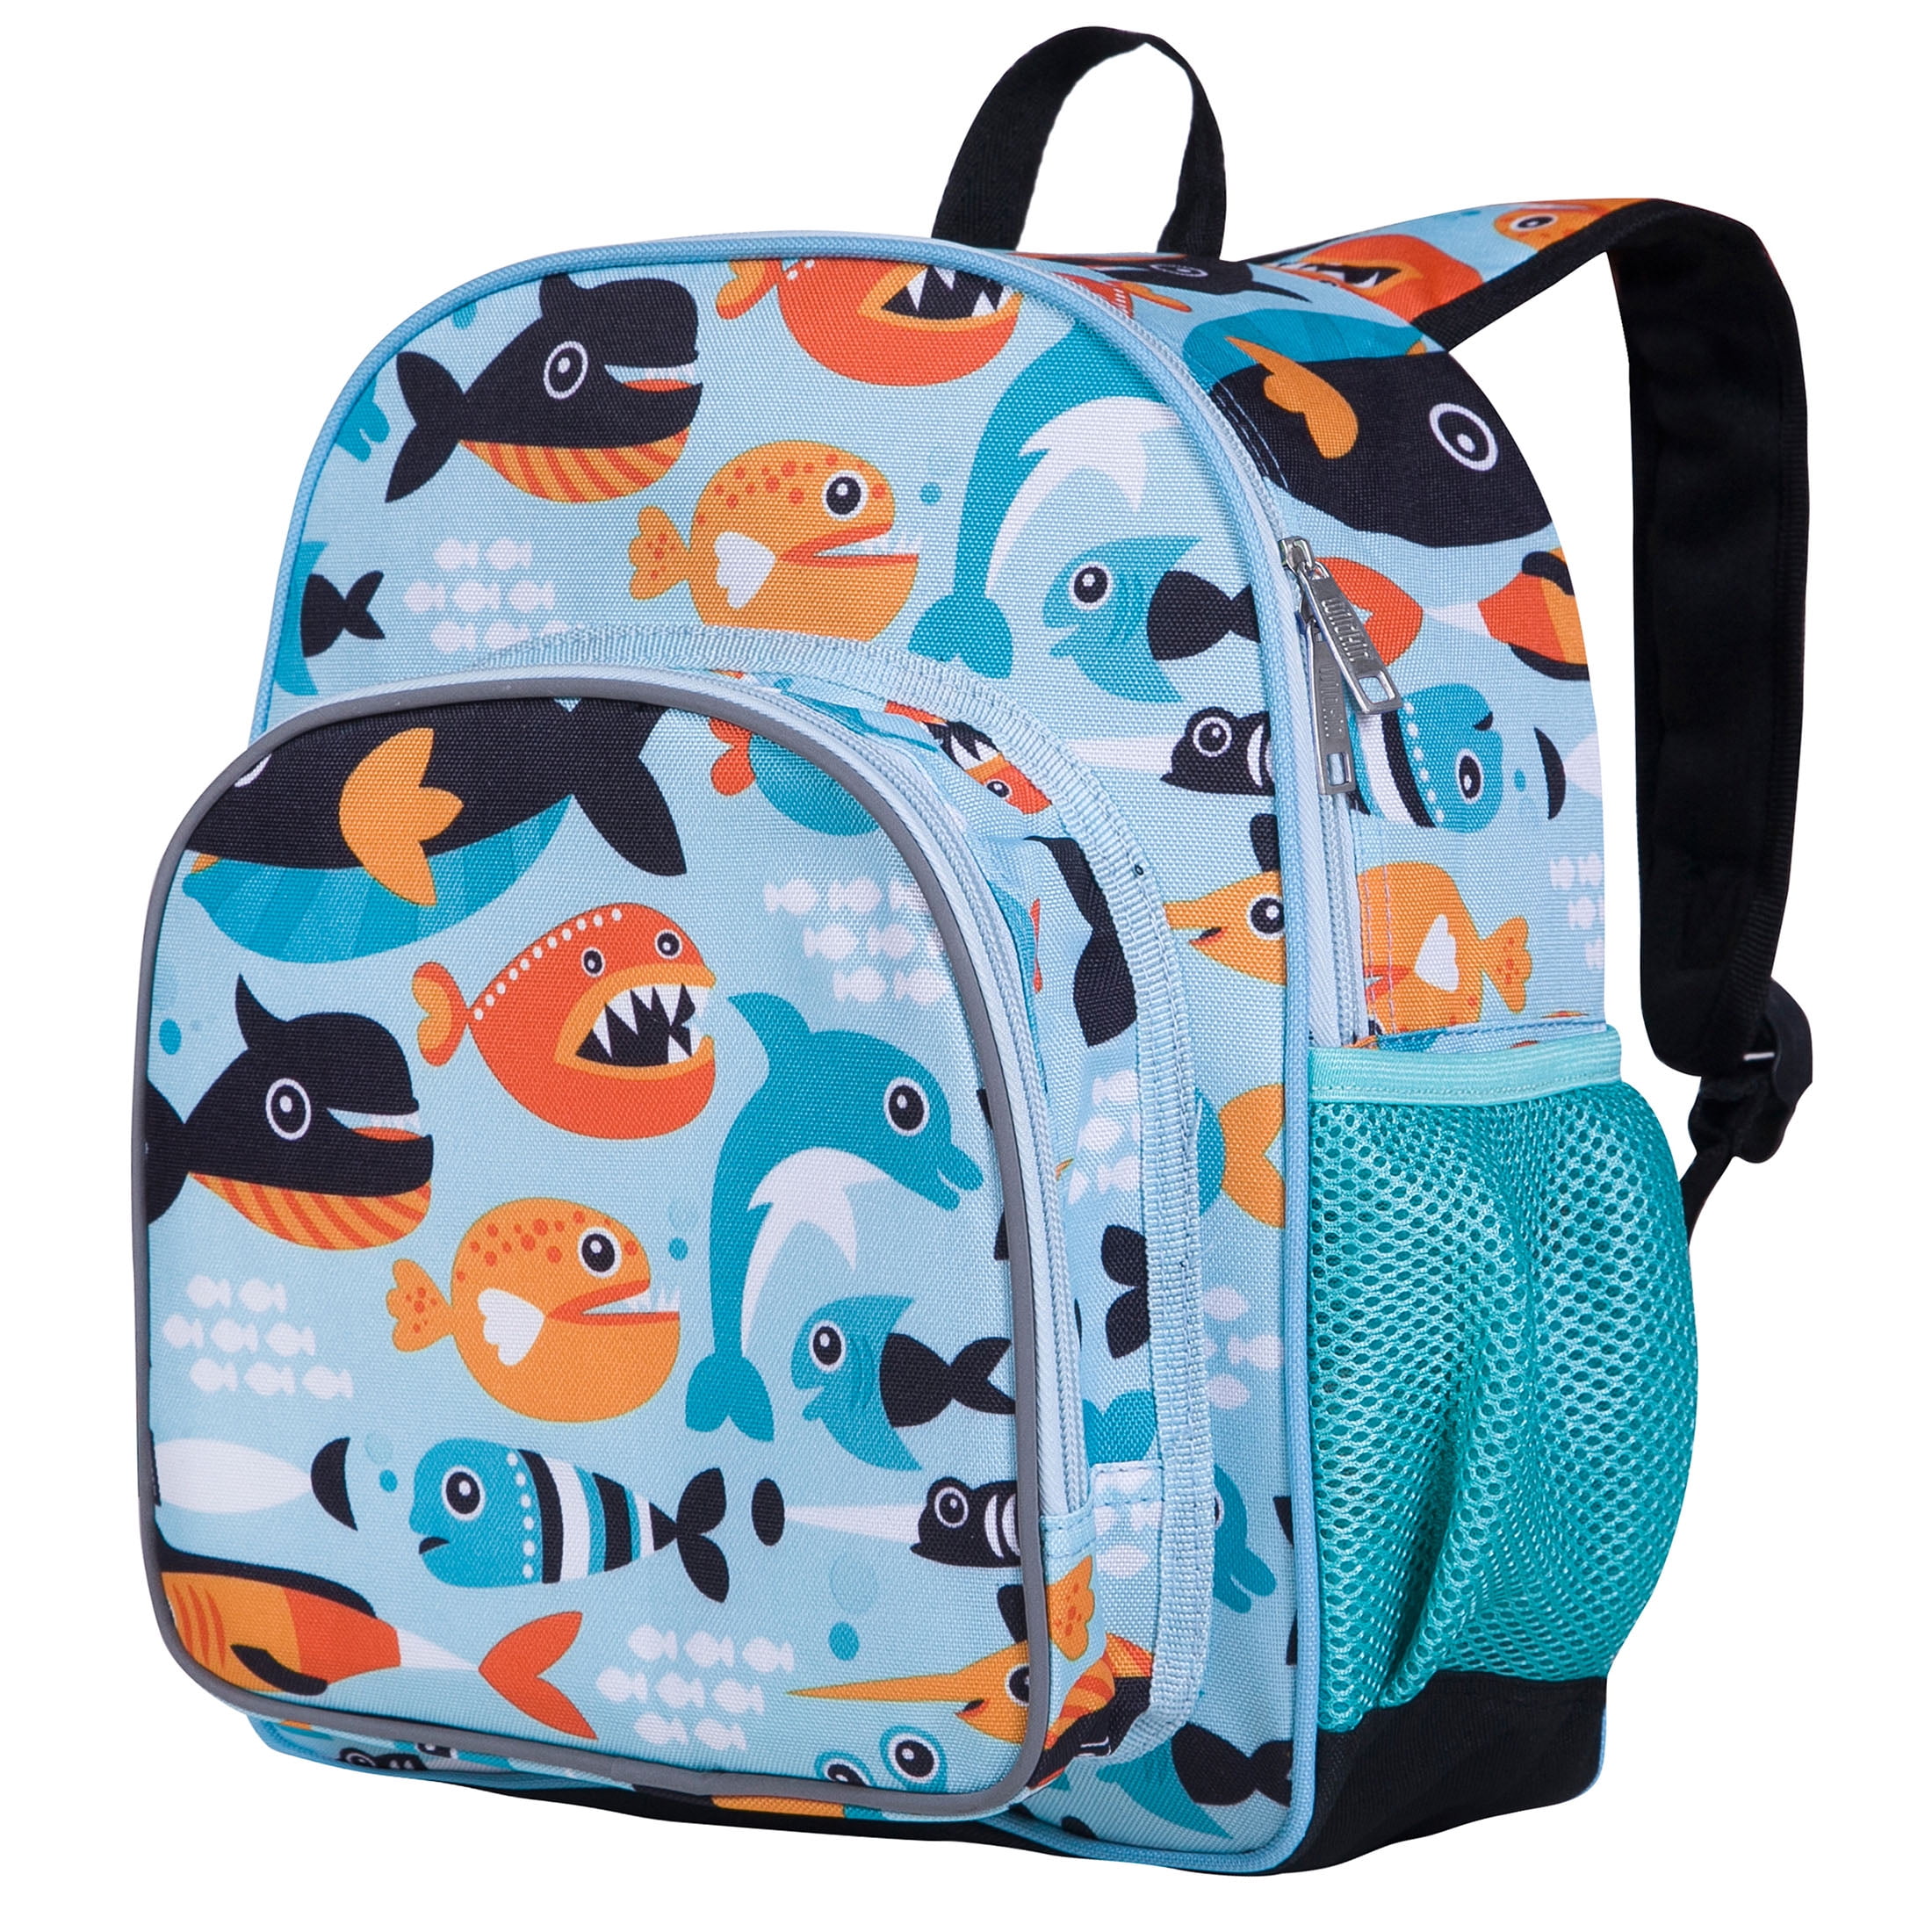 Wildkin Kids 12 Inch Backpack for Toddler Boys and Girls